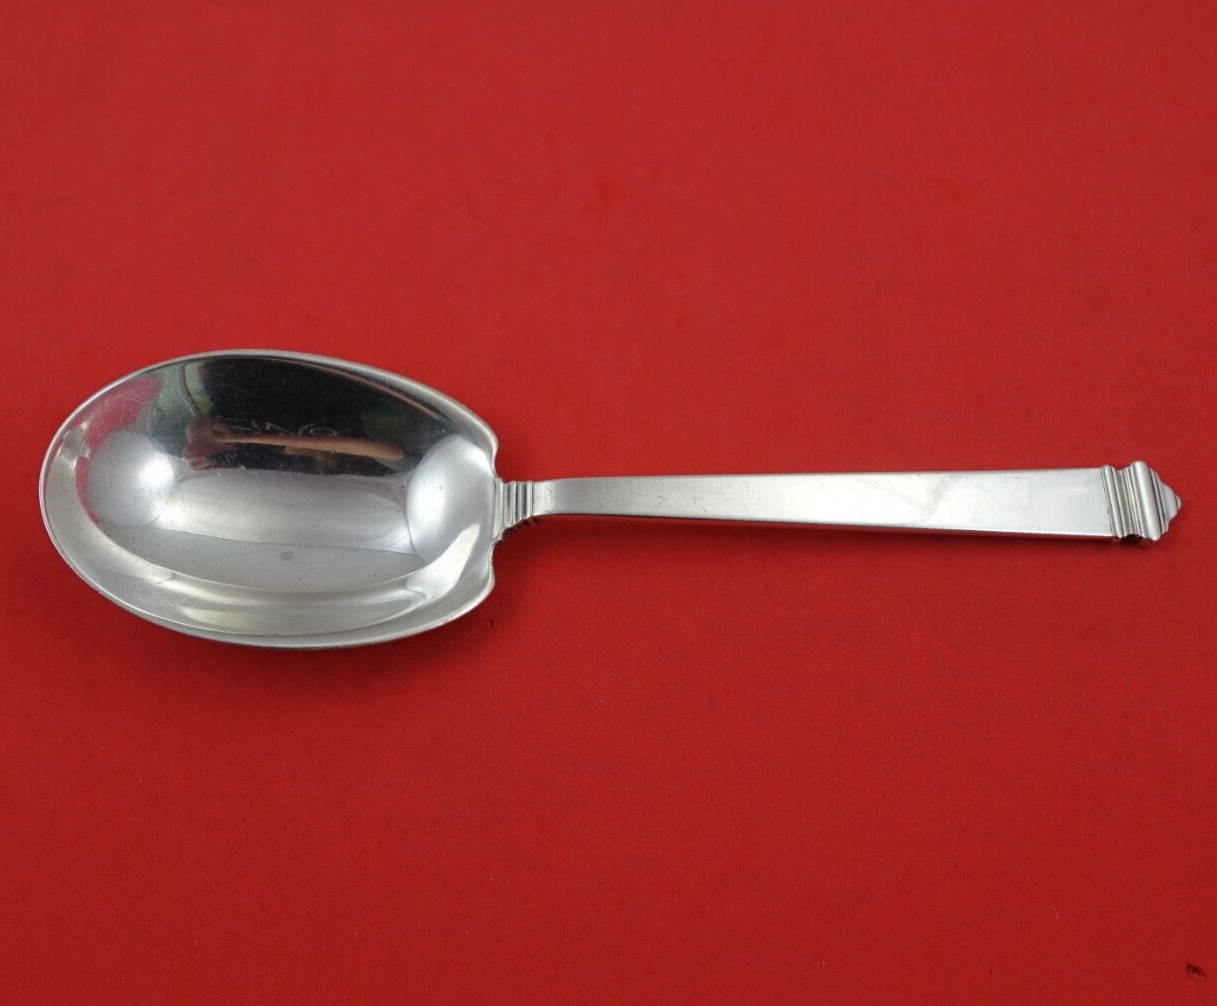 Primary image for Hampton by Tiffany and Co Sterling Silver Preserve Spoon 7 3/4" Serving Heirloom